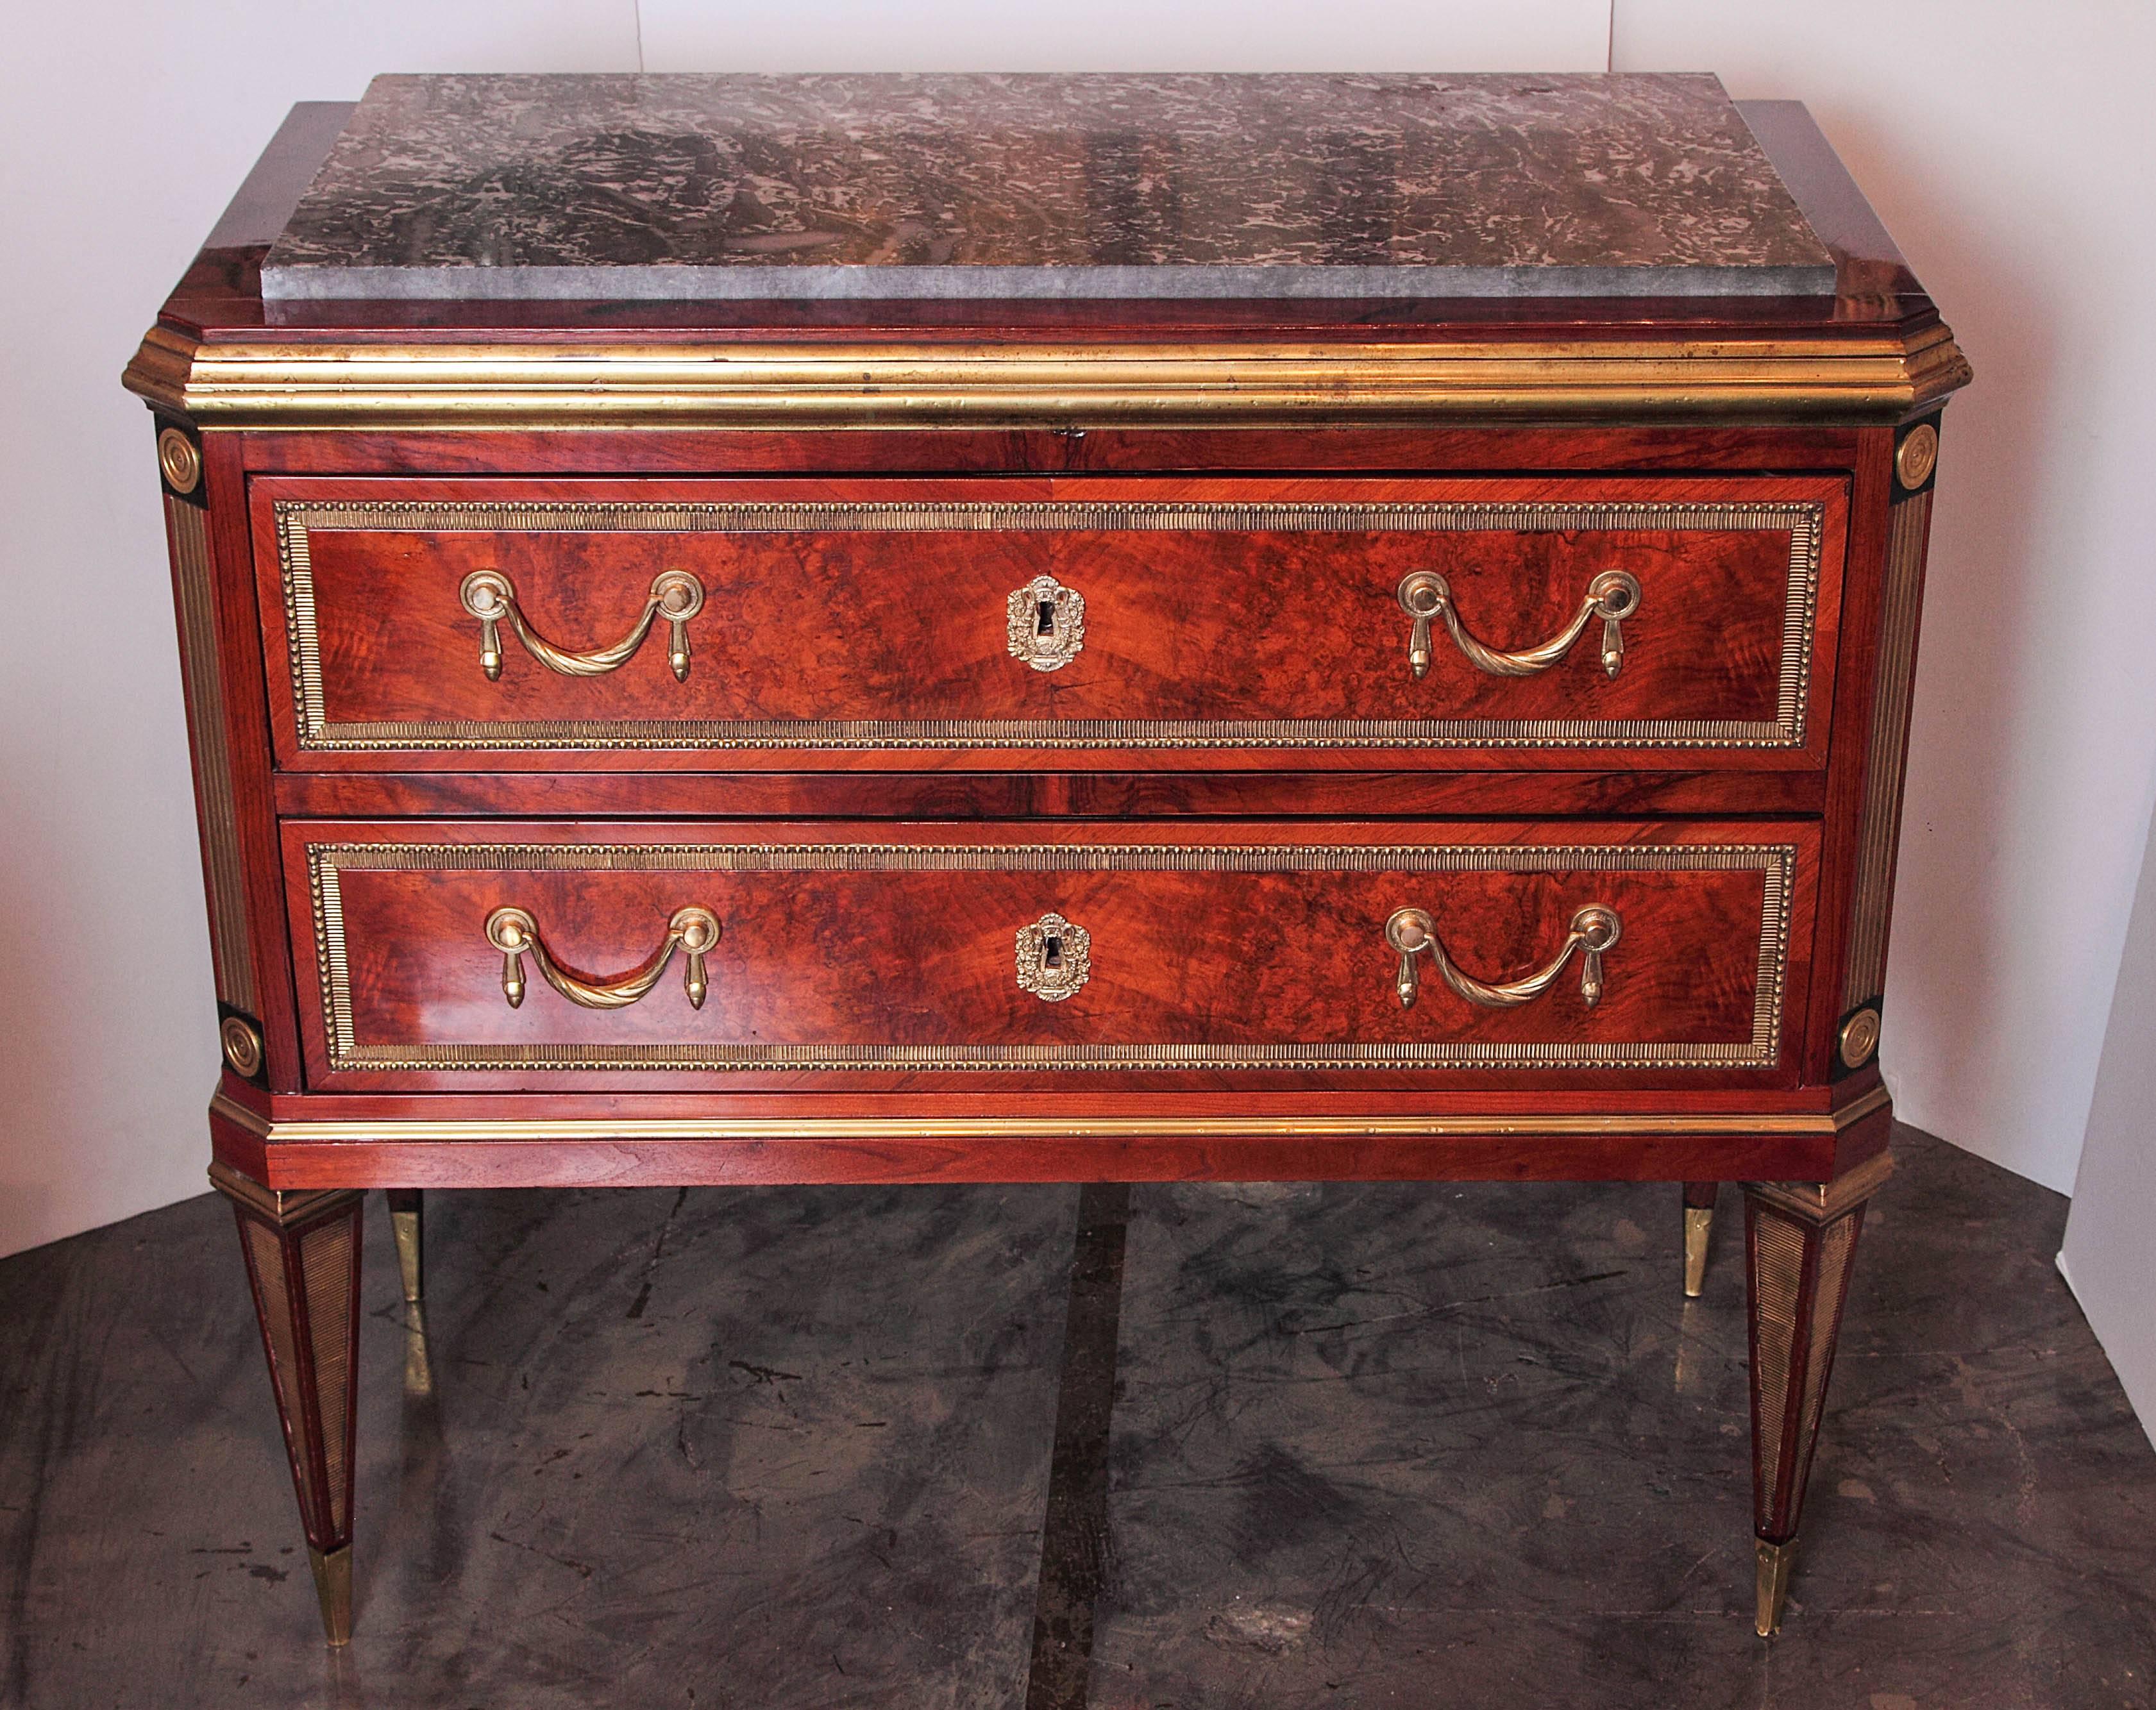 Late 19th c Russian mahogany with inlayed hand hammered brass mounts .